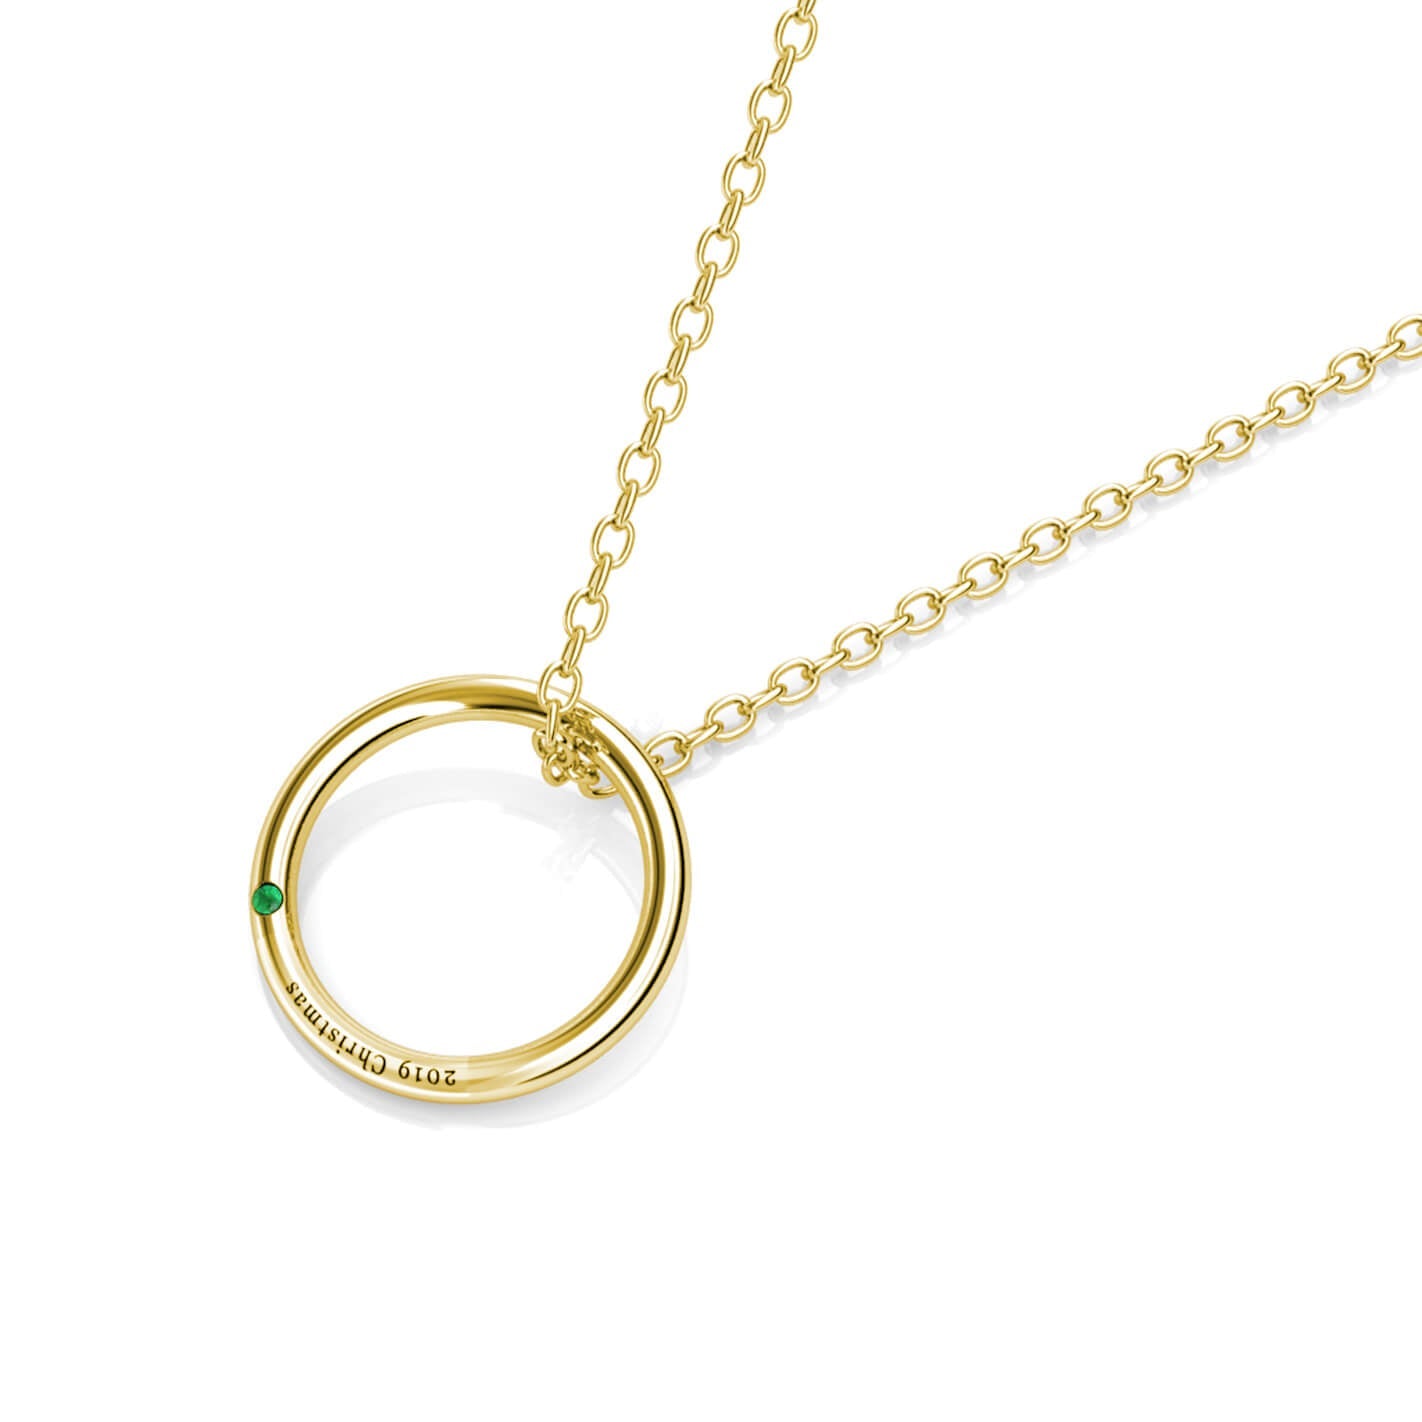 Engraved Ring Necklace with Birthstone